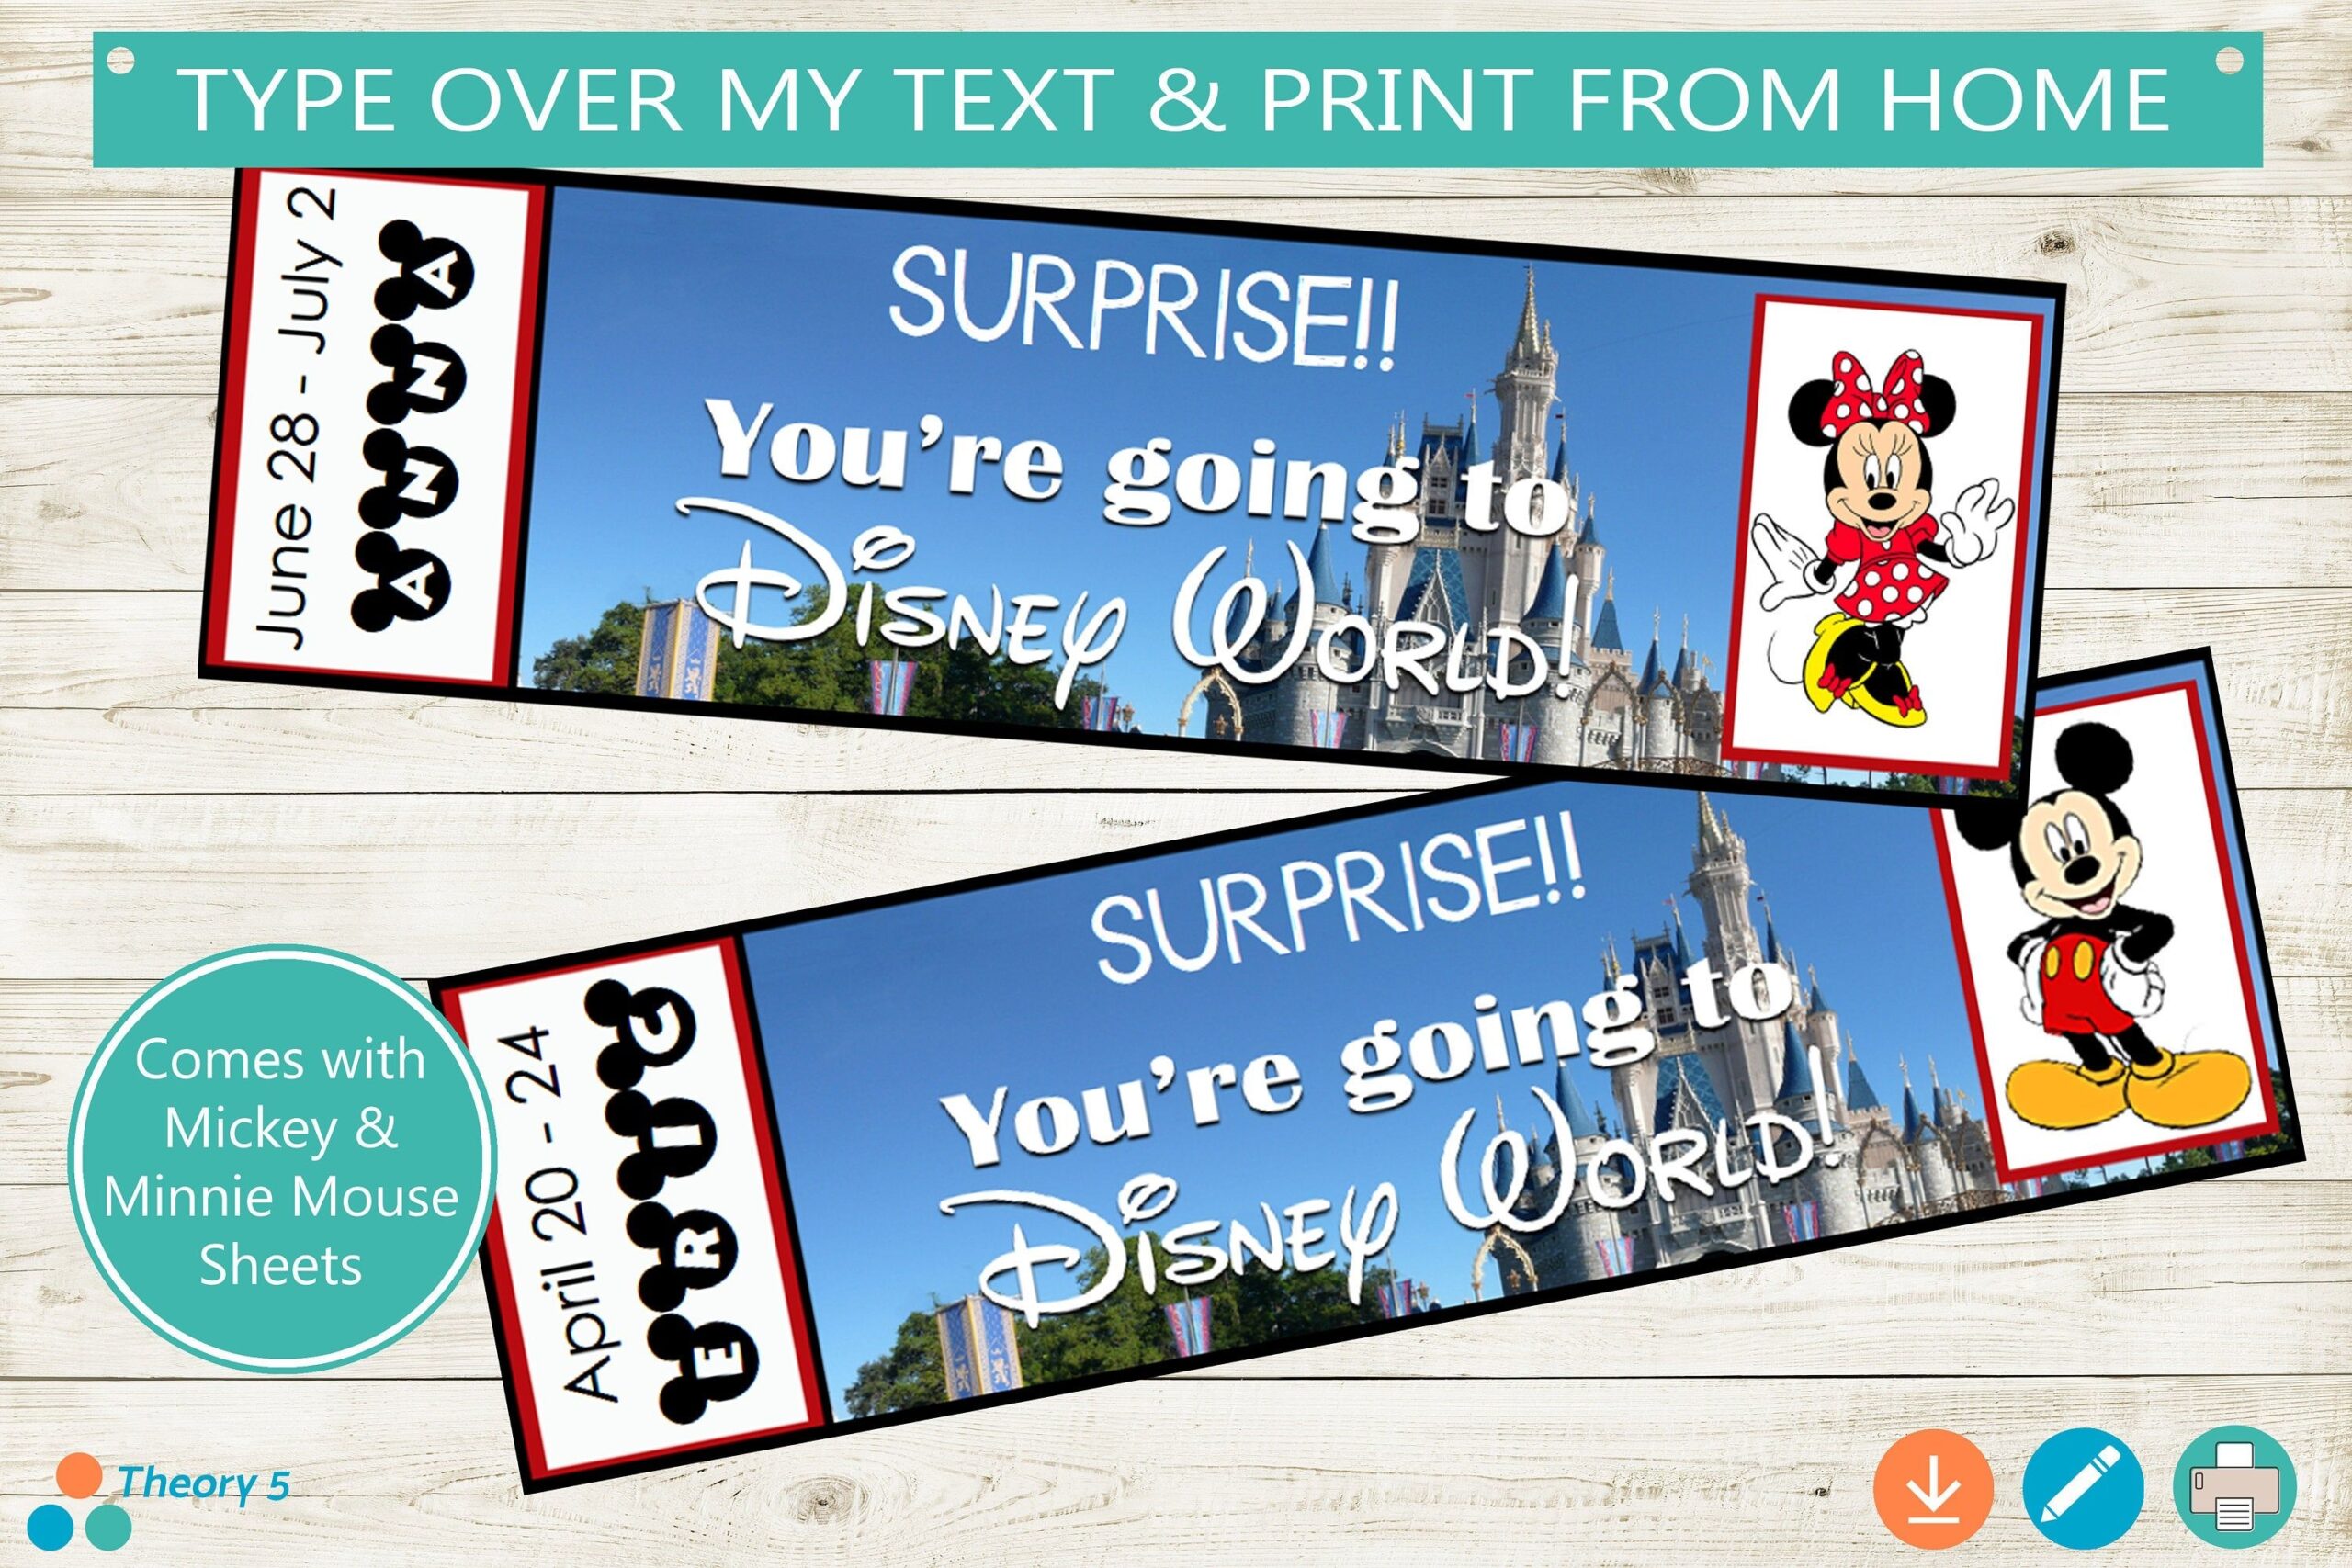 Printable And Editable Novelty Tickets Adobe Editable PDF Trip Reveal Tickets Surprise Vacation Mouse Custom DIY Gift Idea Name Text Etsy Disney Tickets Disney World Tickets Disney Surprise